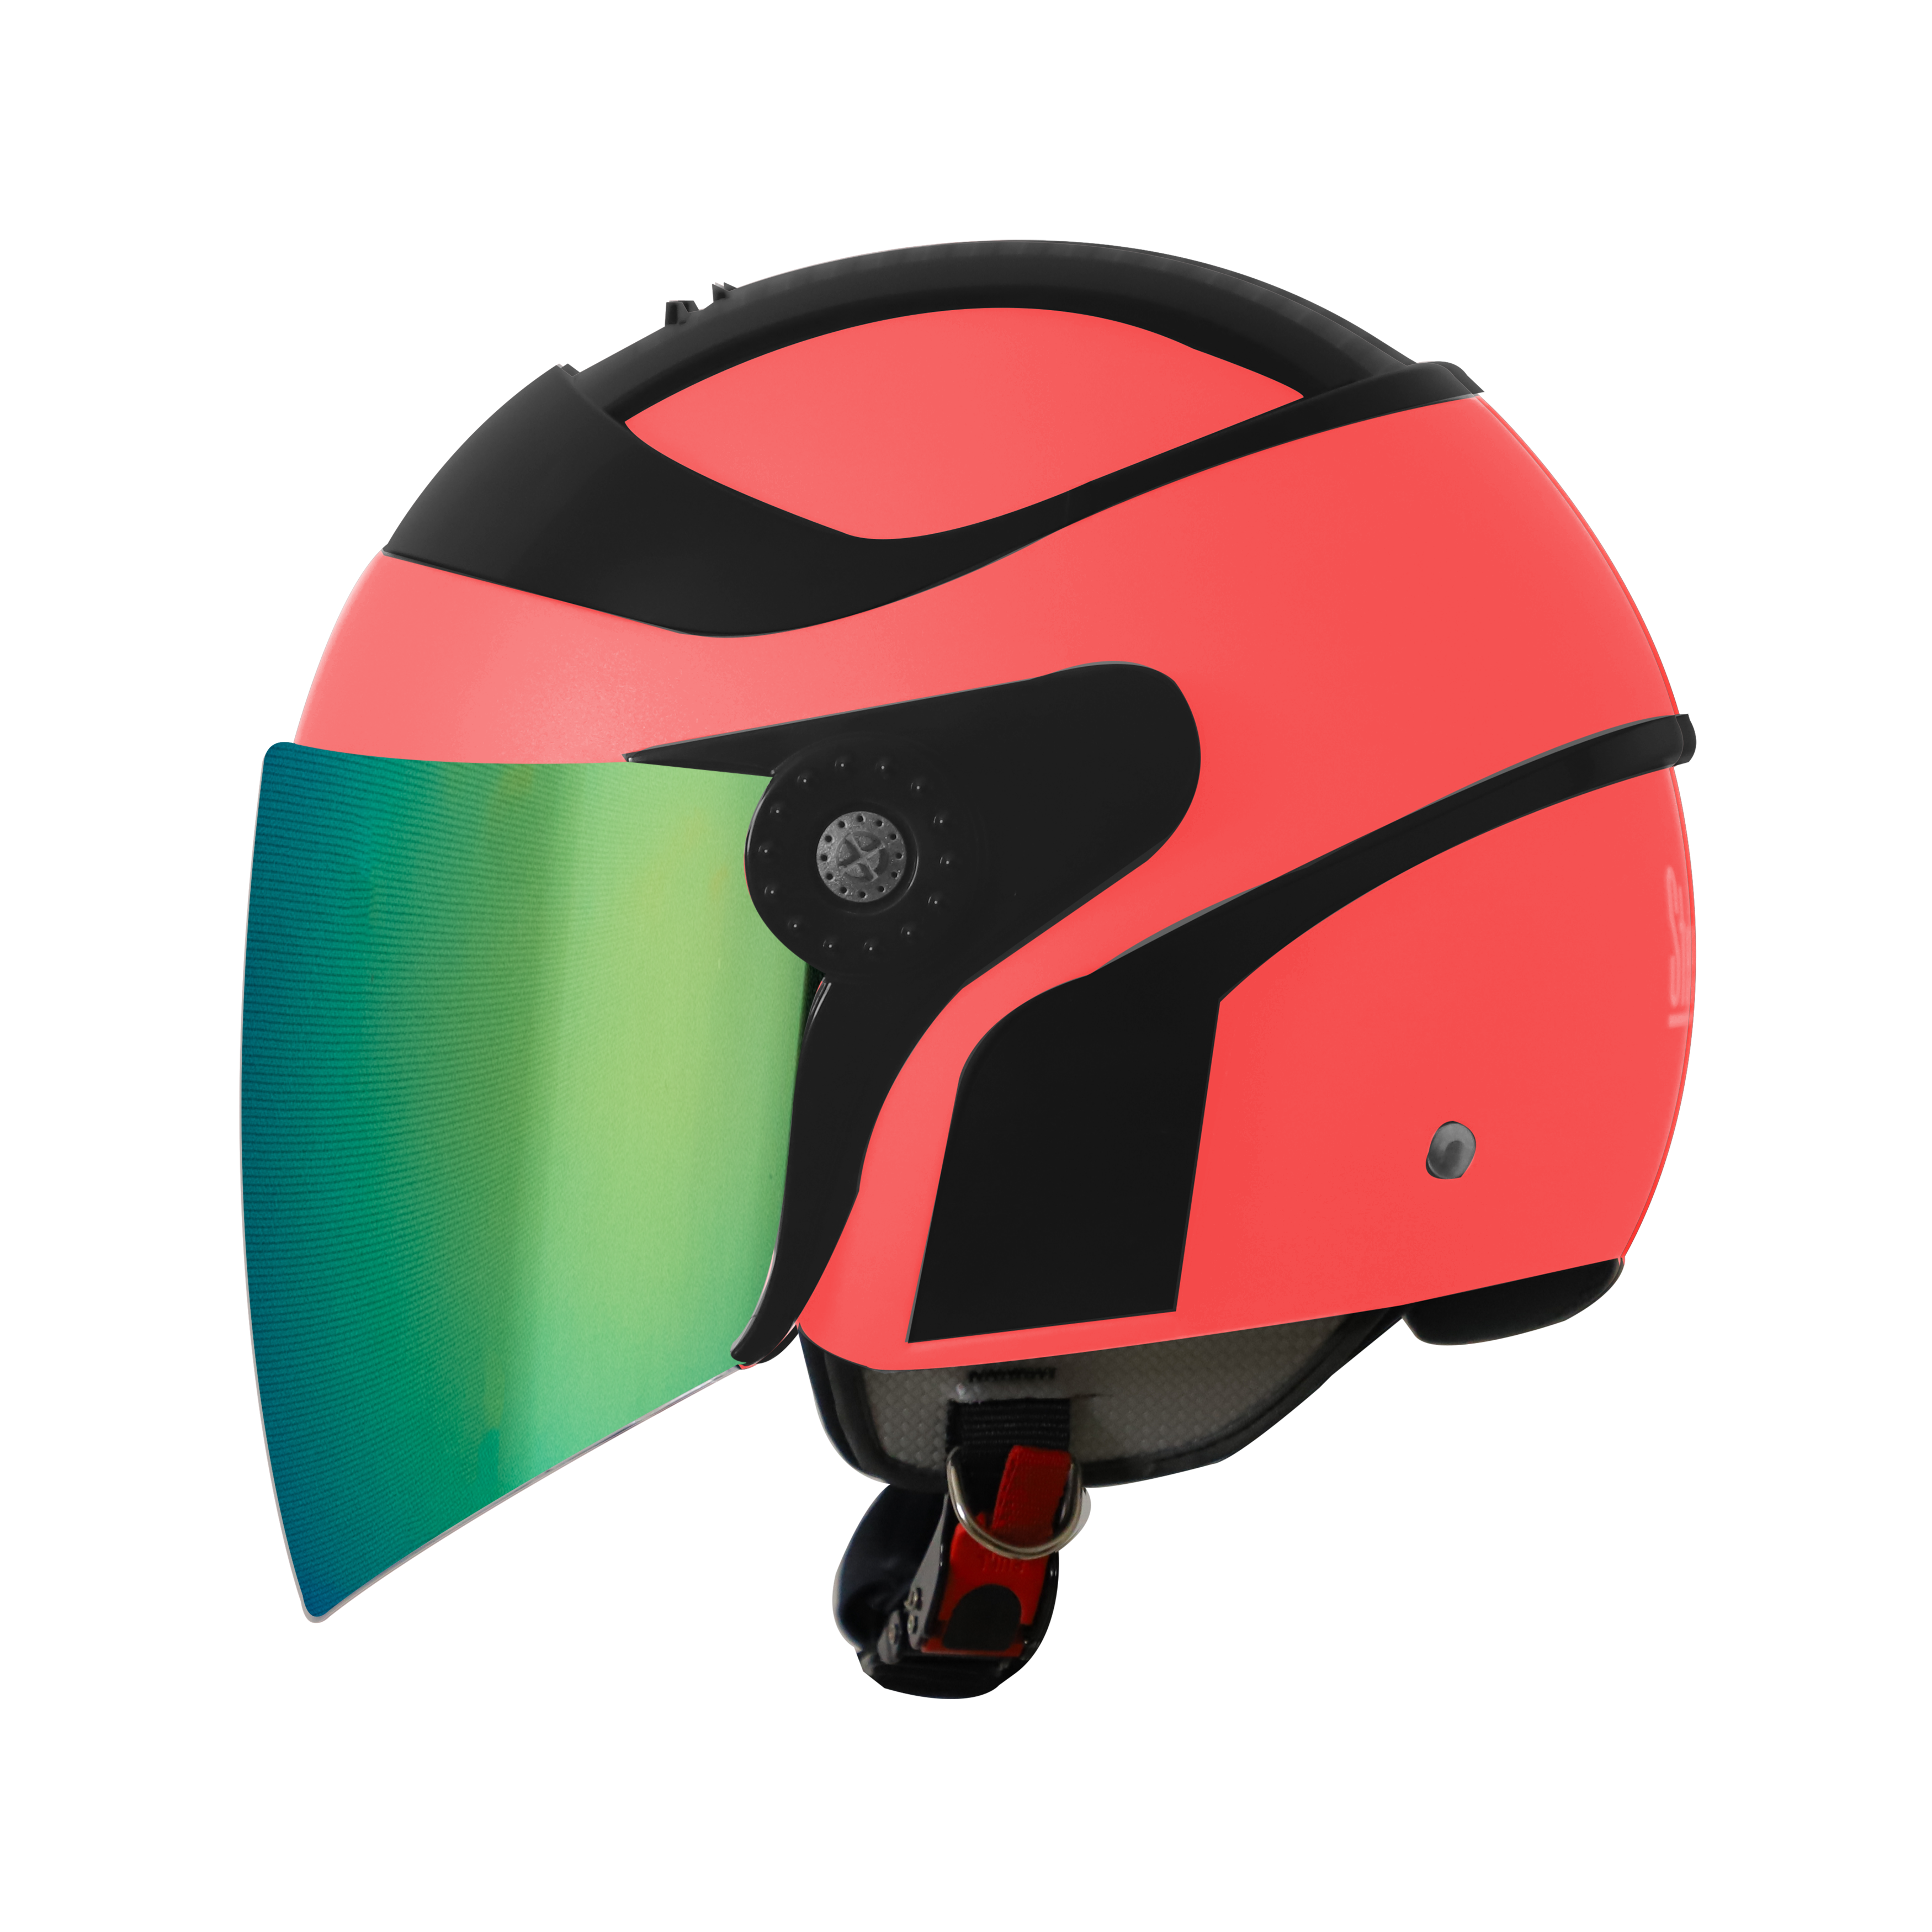 SB-29 AER GLOSSY FLUO WATERMELON WITH BLACK ( FITTED WITH CLEAR VISOR WITH EXTRA RAINBOW CHROME VISOR FREE)